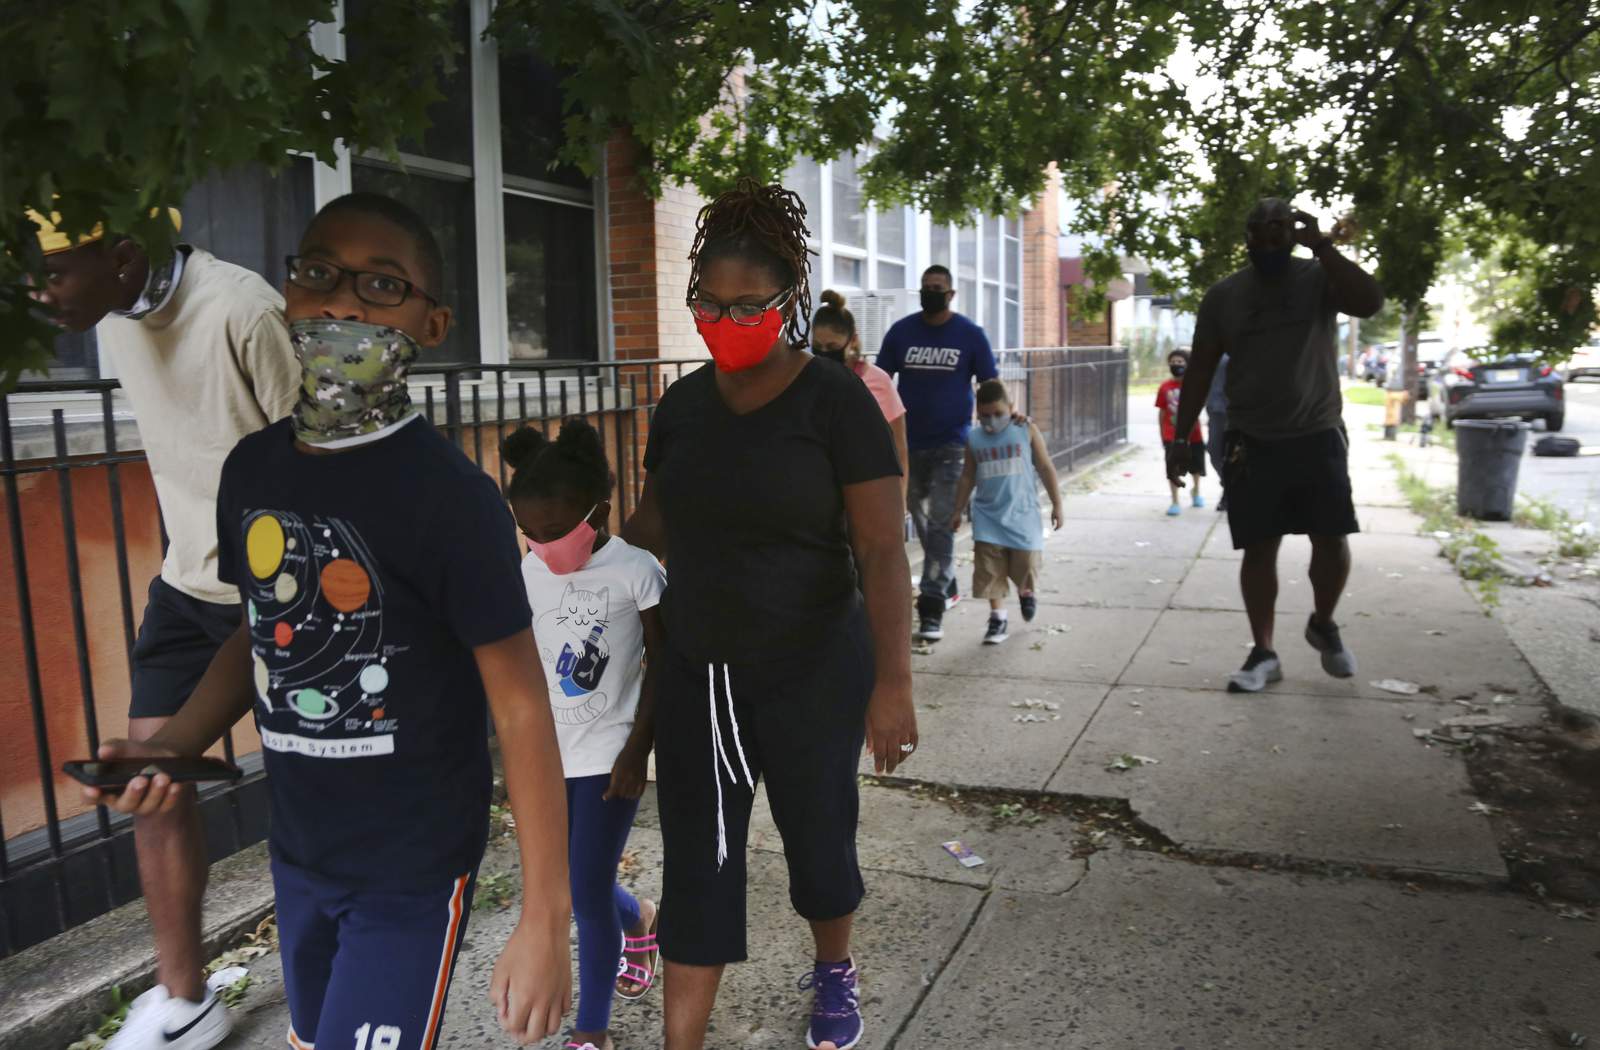 Amid pandemic, future of many Catholic schools is in doubt